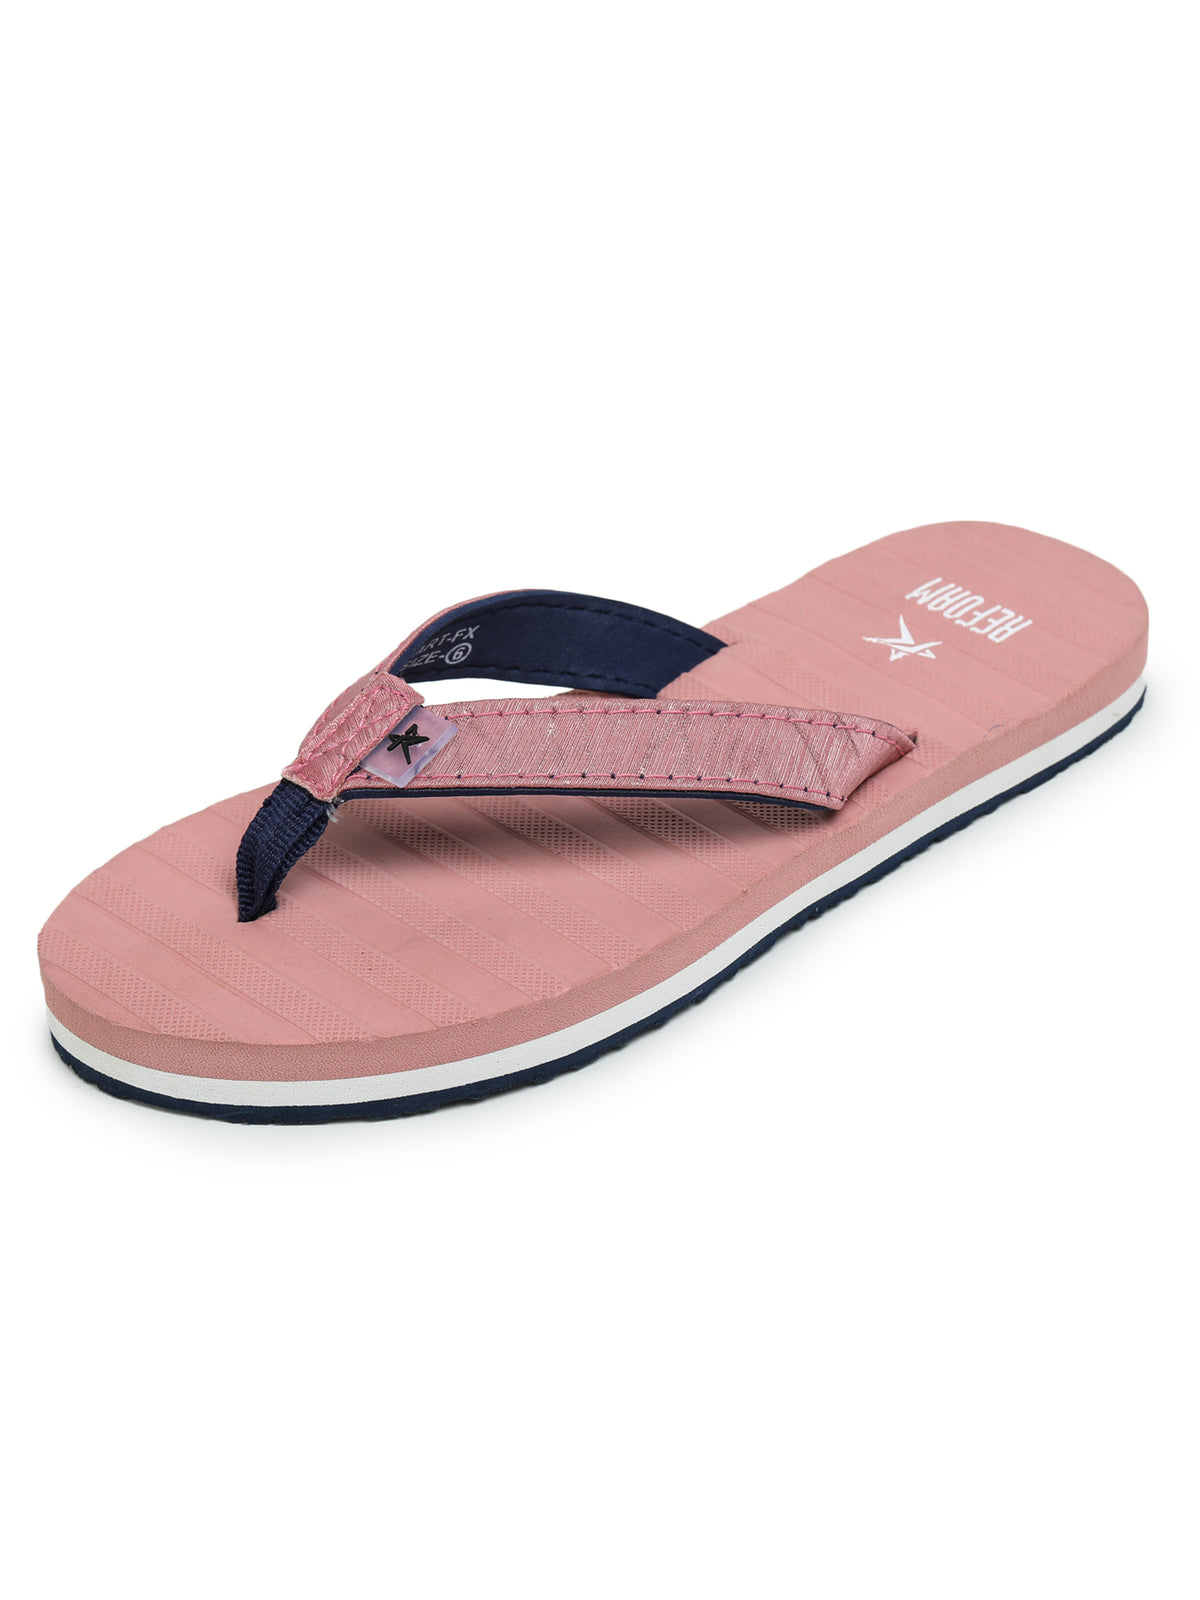 Pink Solid Leather Slip On Casual Slippers For Women